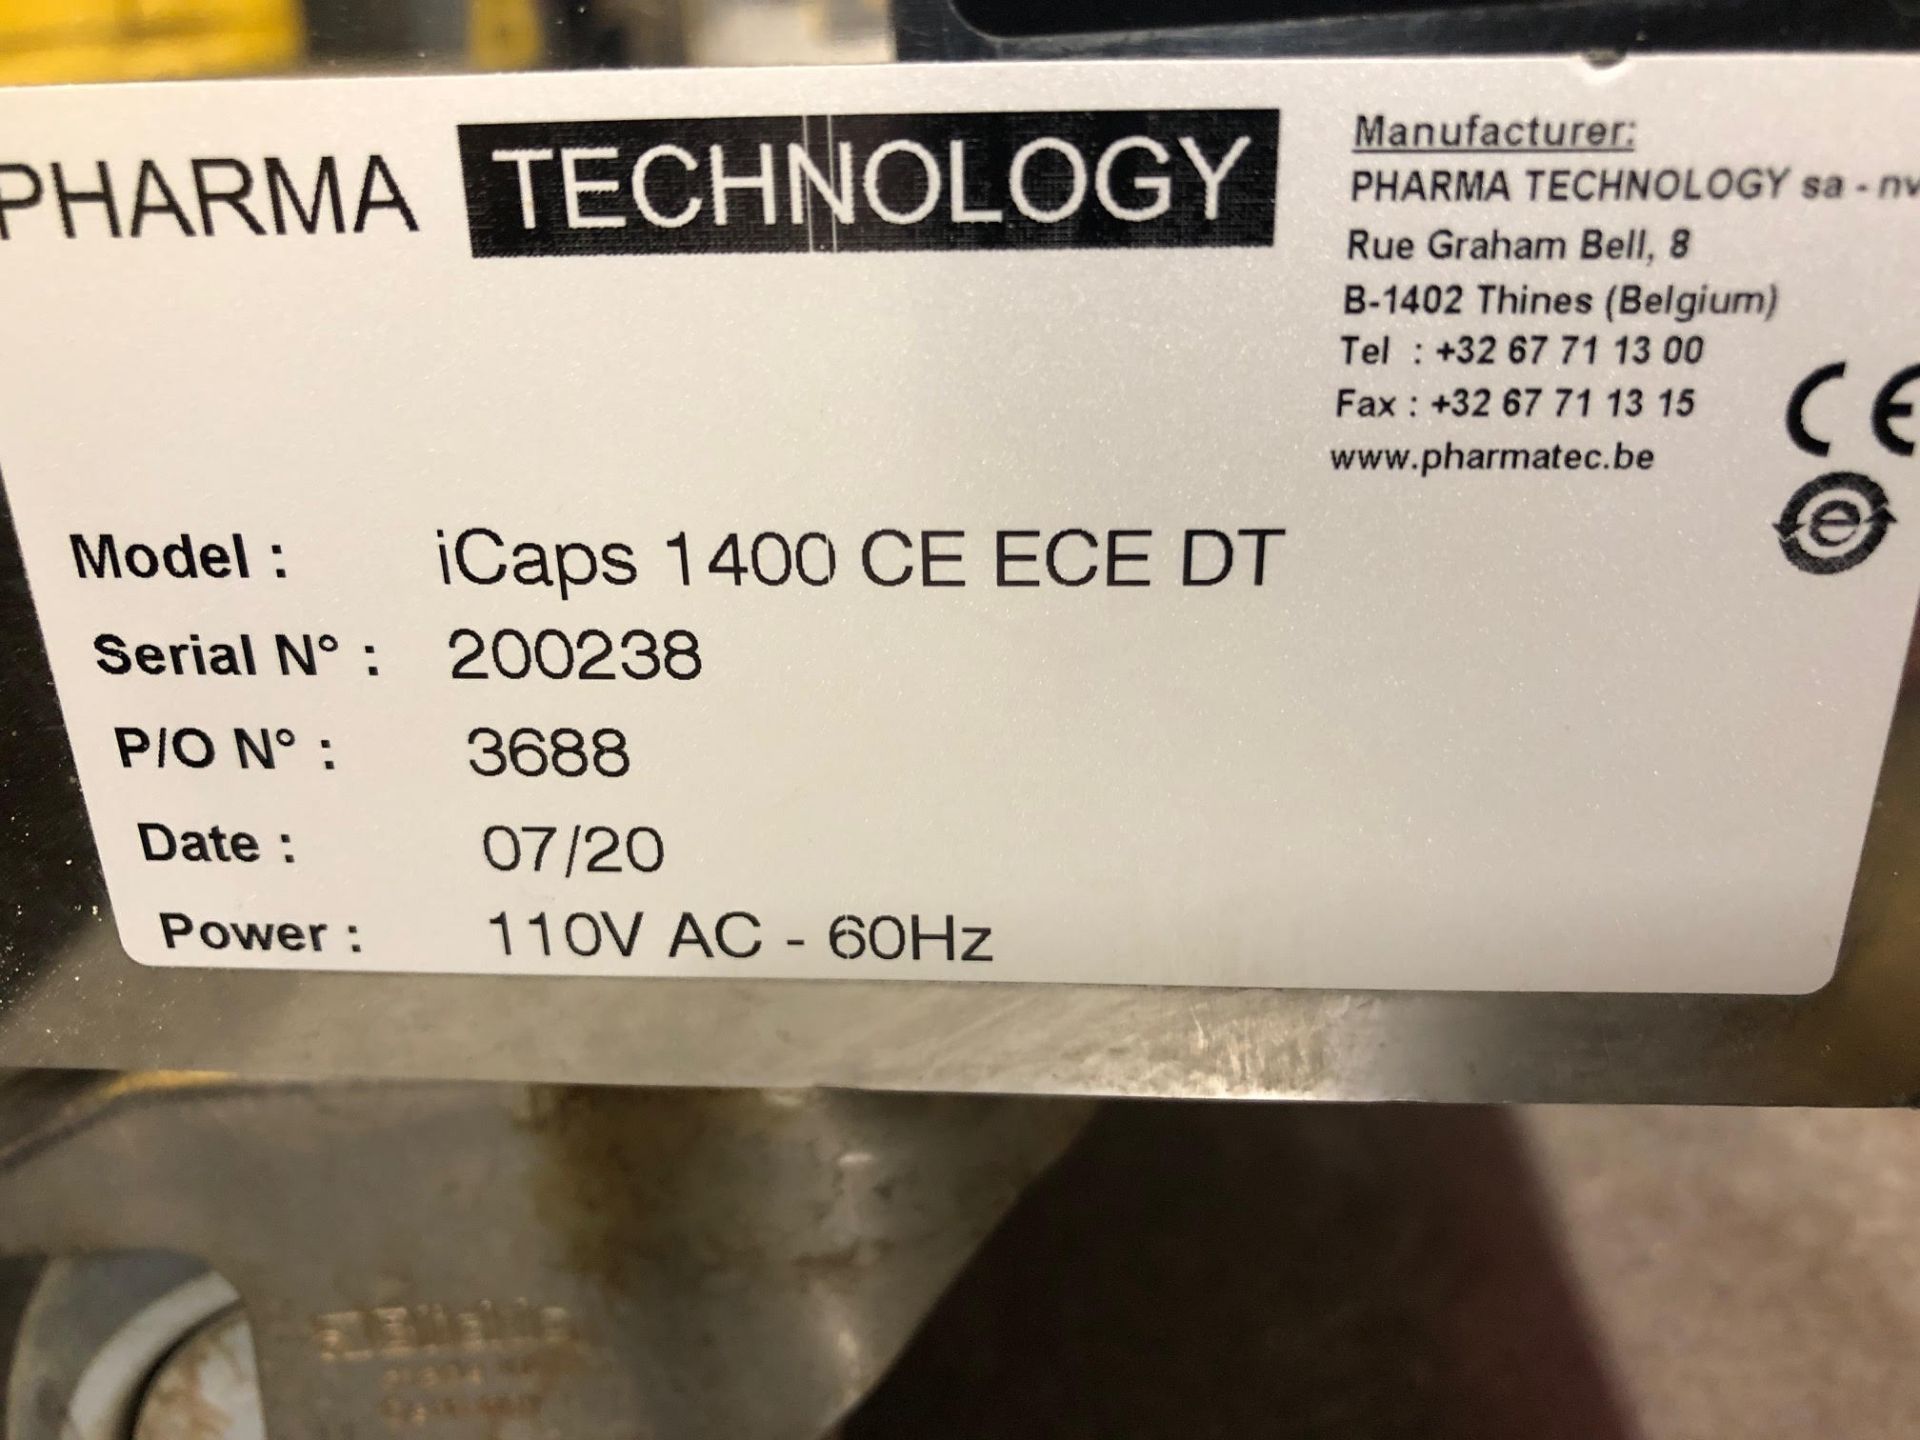 New! Pharma Technologies Vertical 5 Model iCaps 1400 CE ECE DT Capsule Polisher w/ Metal Check - Image 3 of 28